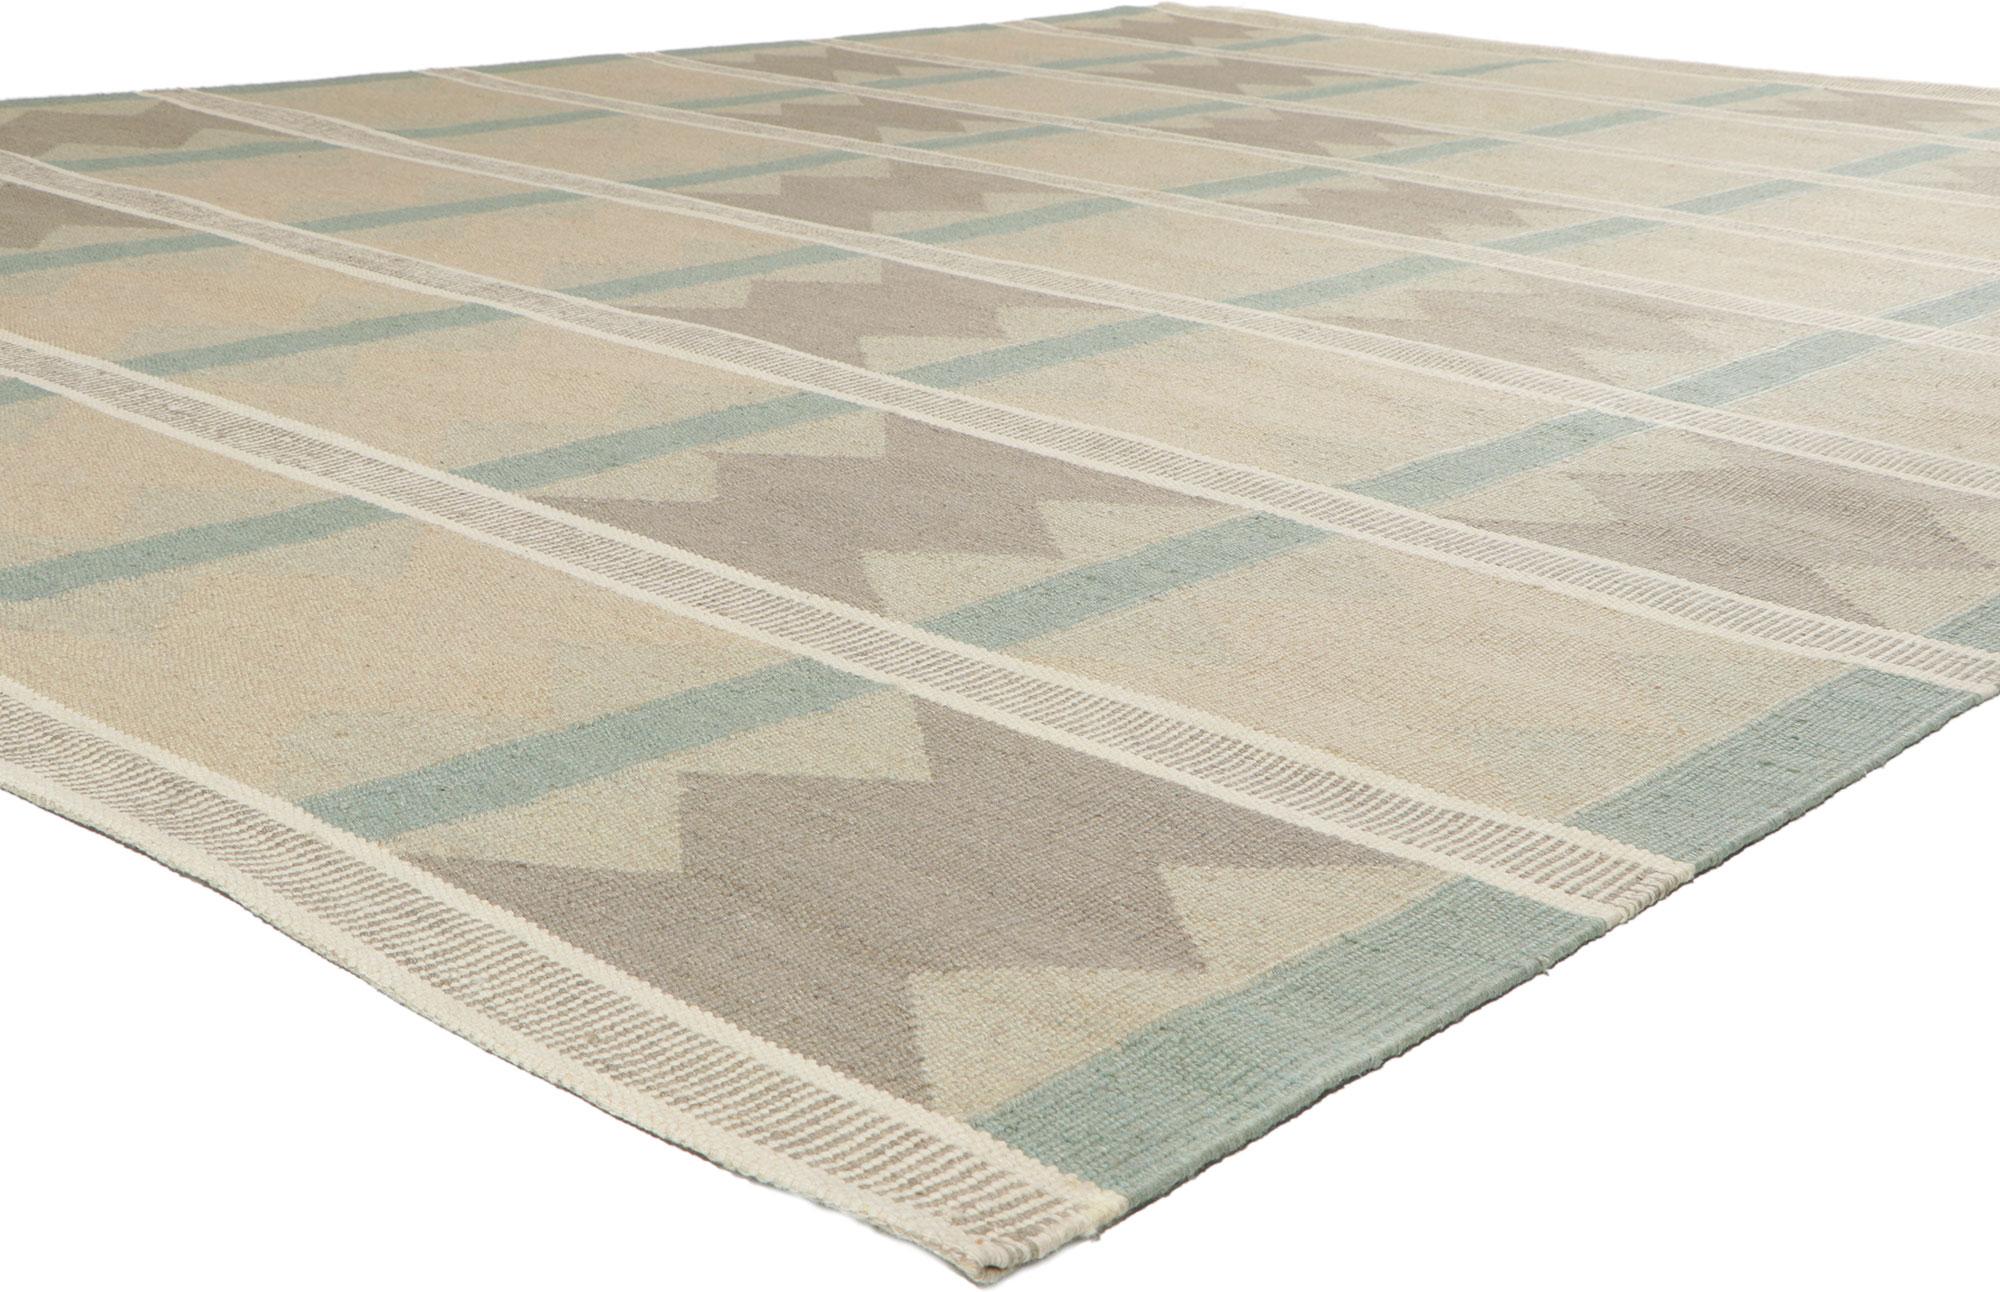 30843 New Swedish Ingegerd Silow Inspired Kilim rug with Scandinavian Modern Style 10'03 x 13'05.? With its simplicity, geometric design and soft colors, this hand-woven wool Swedish inspired Kilim rug provides a feeling of cozy contentment without